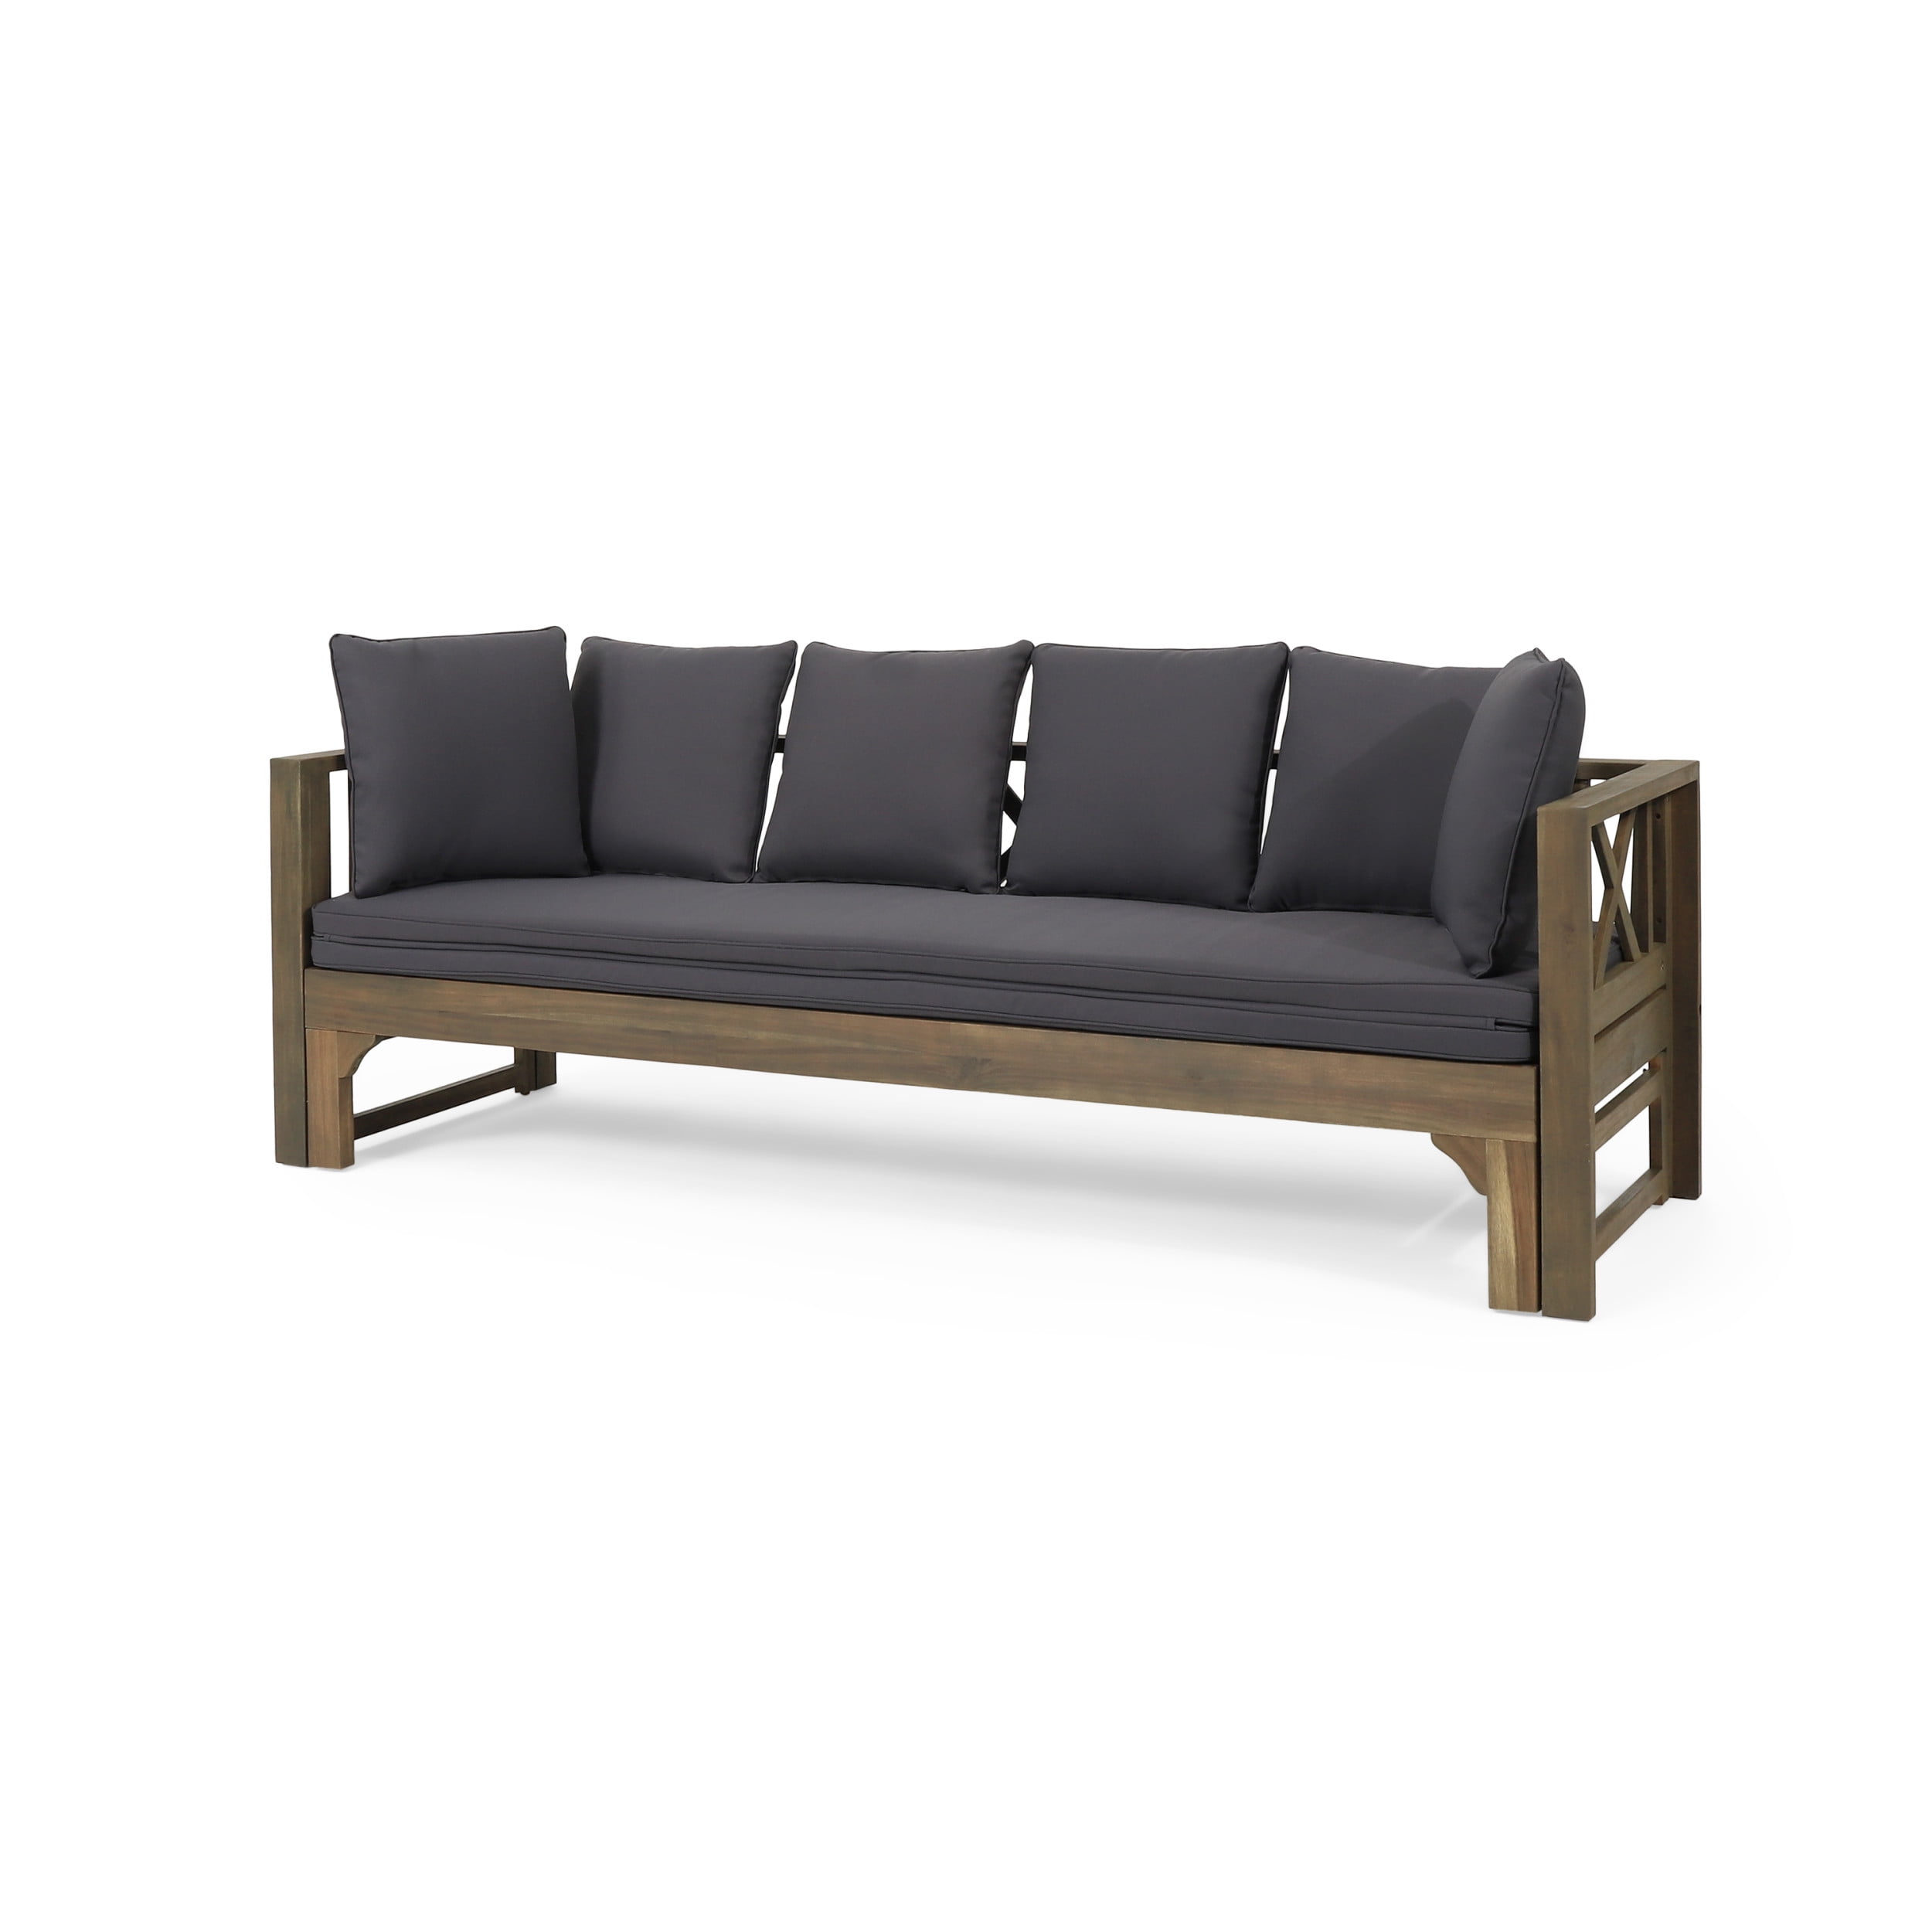 GDF Studio Sofa, Camille and Teak Dark Daybed Teal Extendable Wood Outdoor Acacia